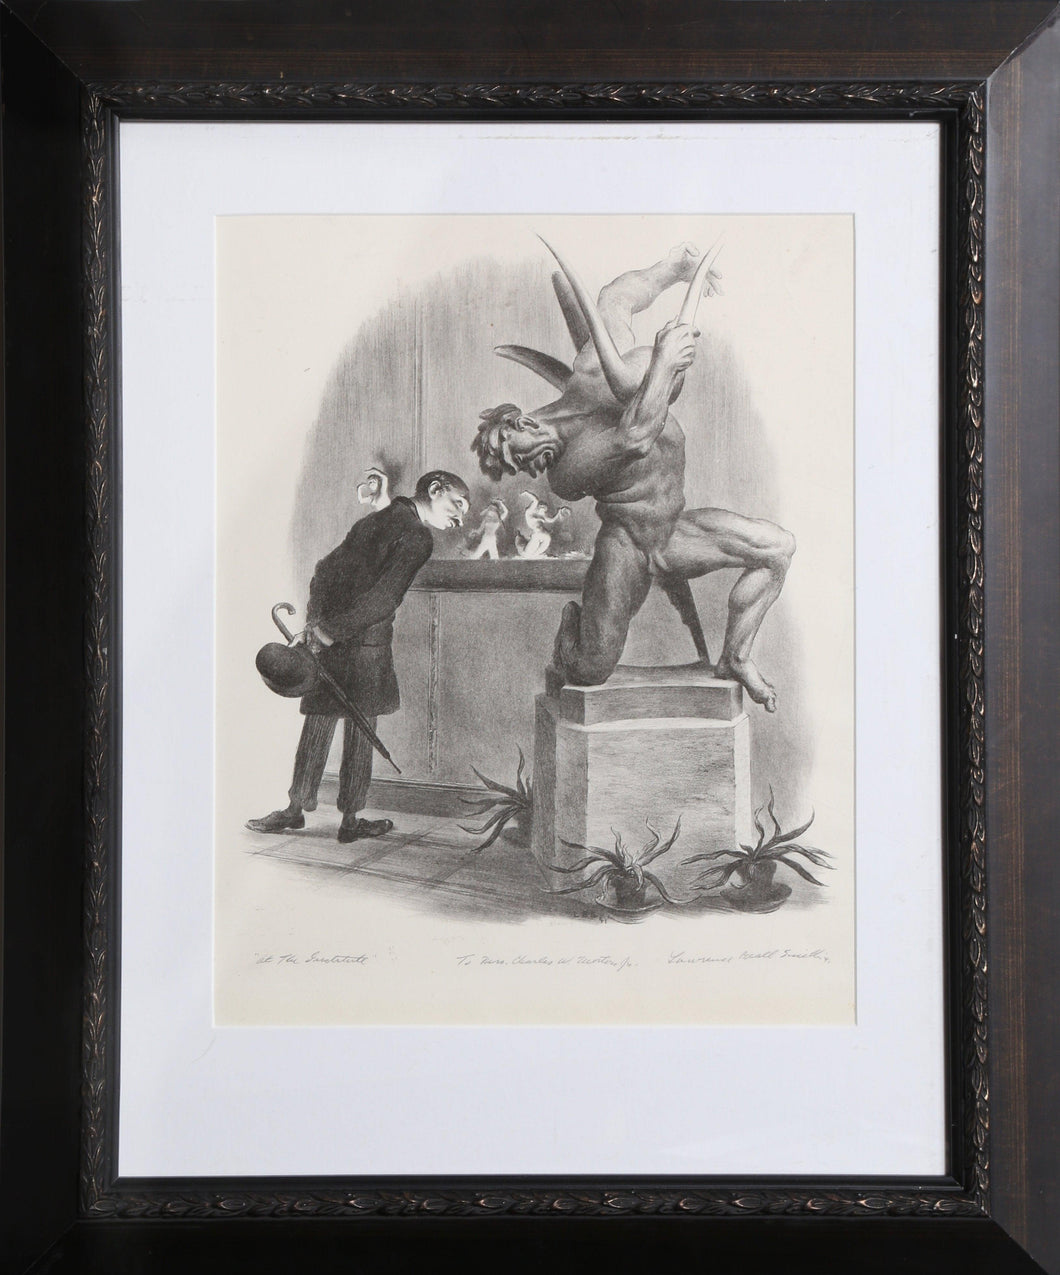 At The Institute Lithograph | Lawrence Beall Smith,{{product.type}}